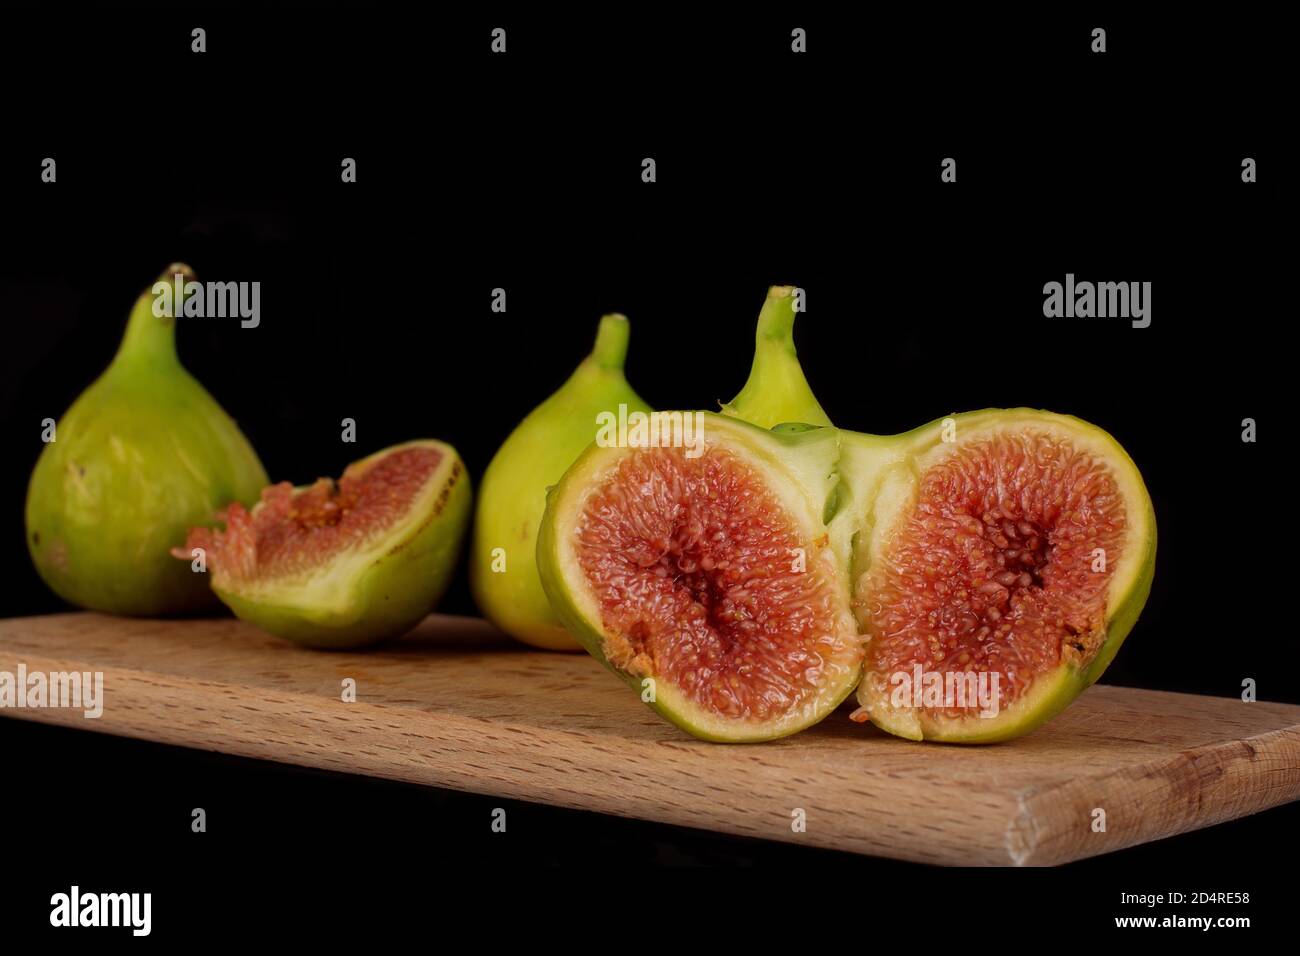 Ripe fresh figs are lying on a wooden cutting board. Two halves of a common fig syconium are lying in the front plane, showing its one-seeded fruits. Stock Photo